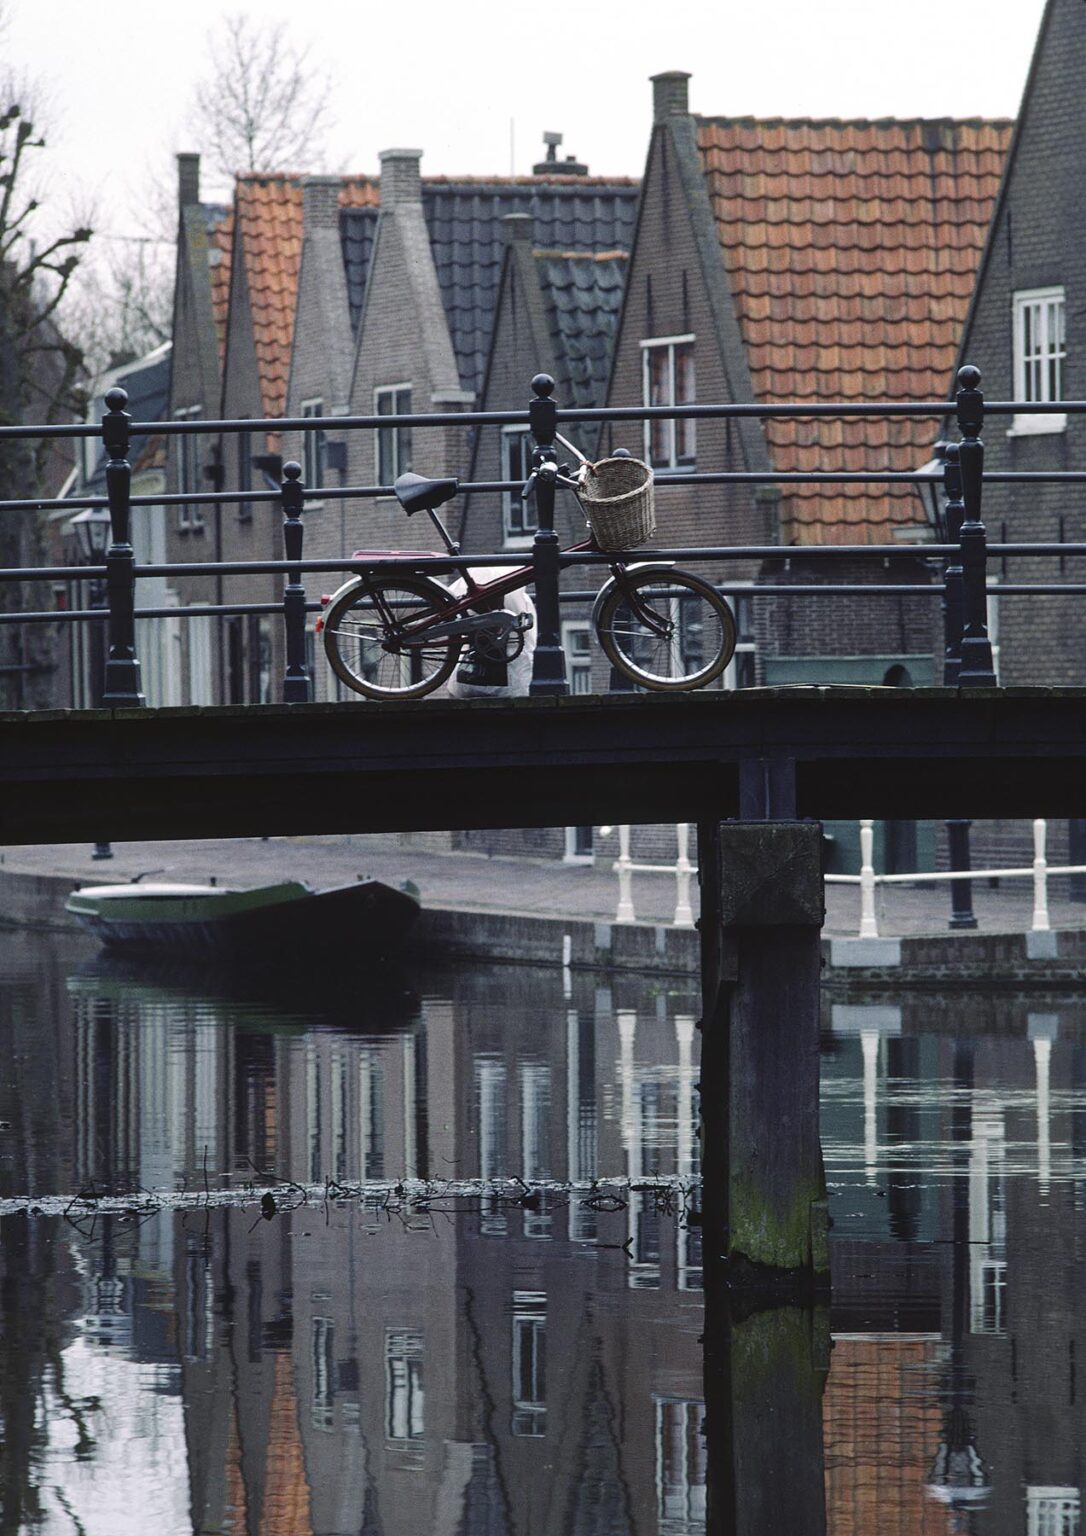 CANAL, BIKE and HOUSES in rural town - THE NETHERLANDS